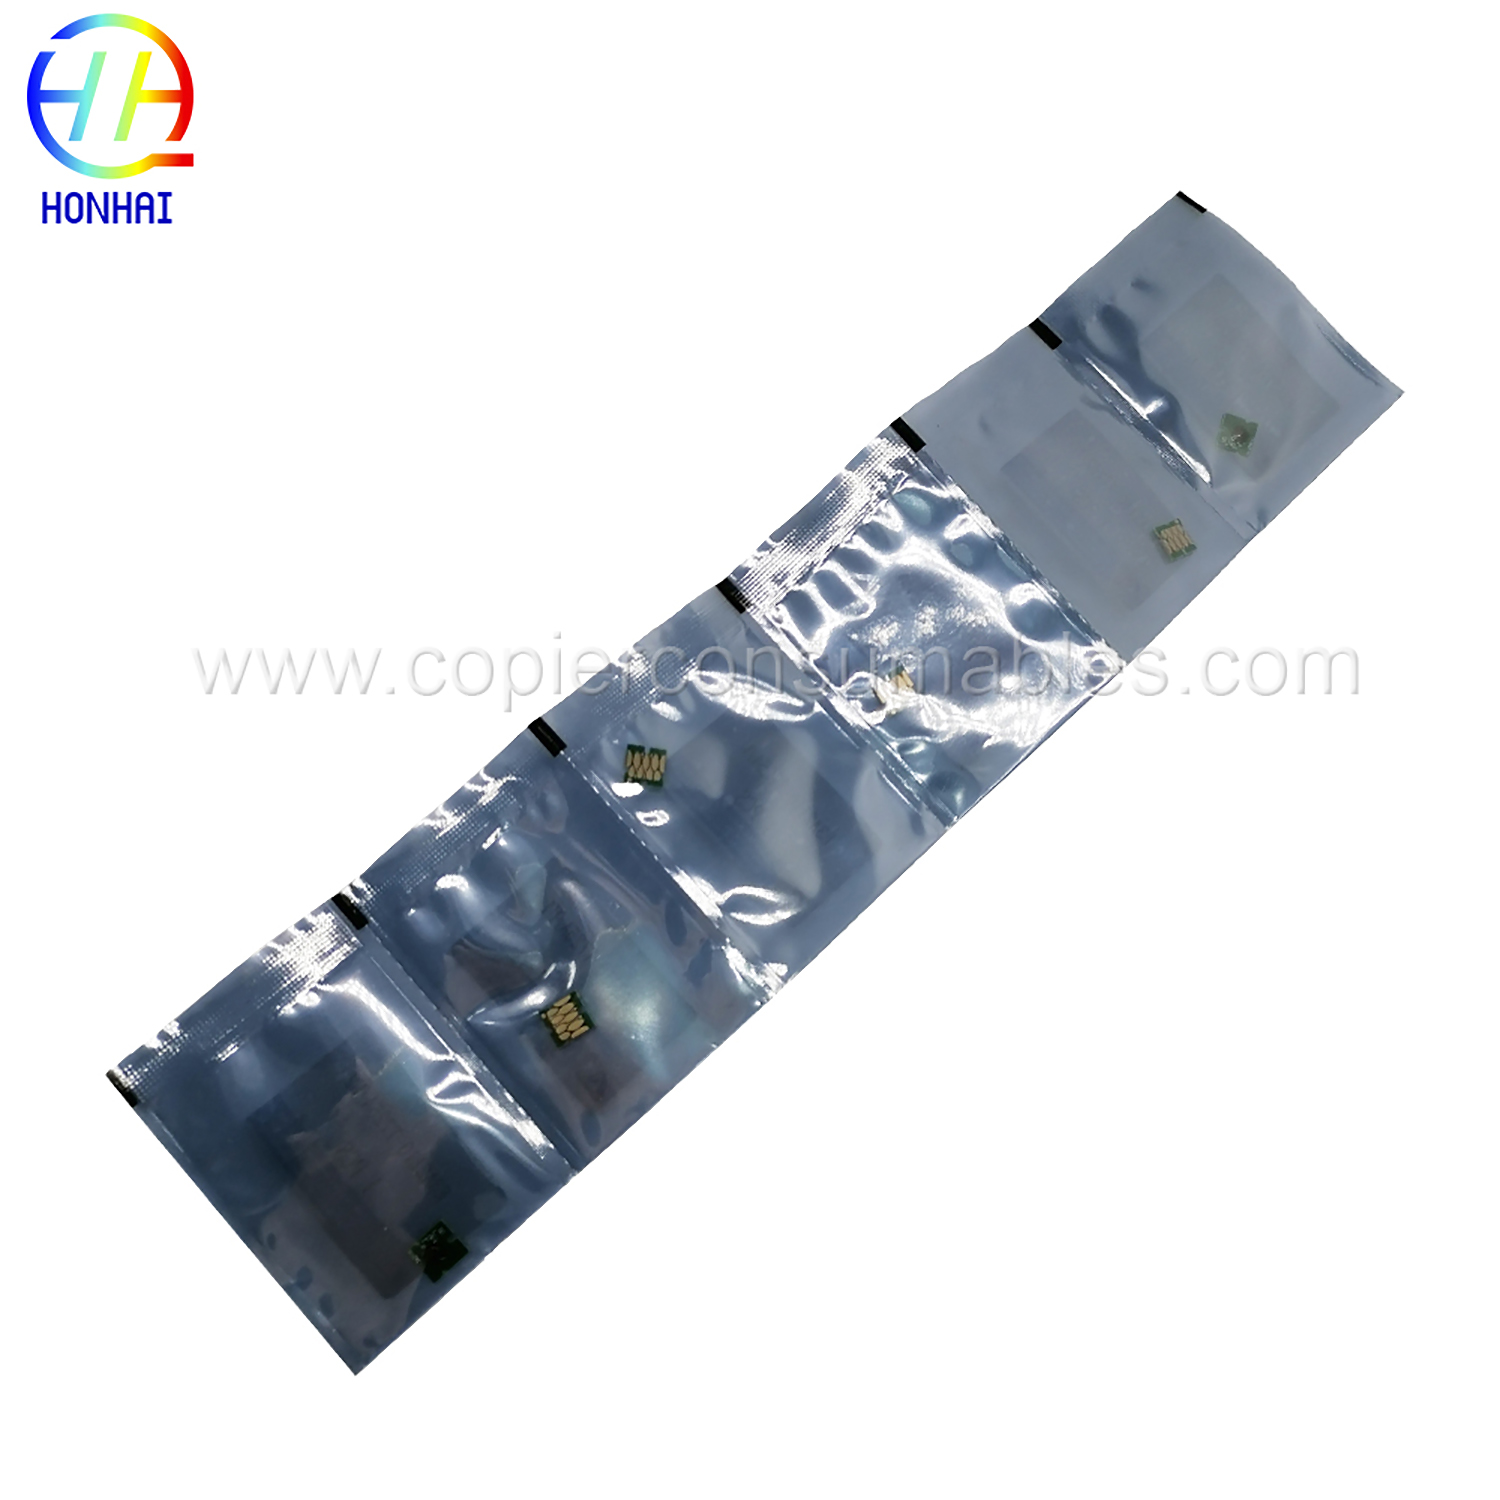 Refillalbe Chip Cartridge Ink For Epson F2000 F2100 F2130 (1) 拷贝